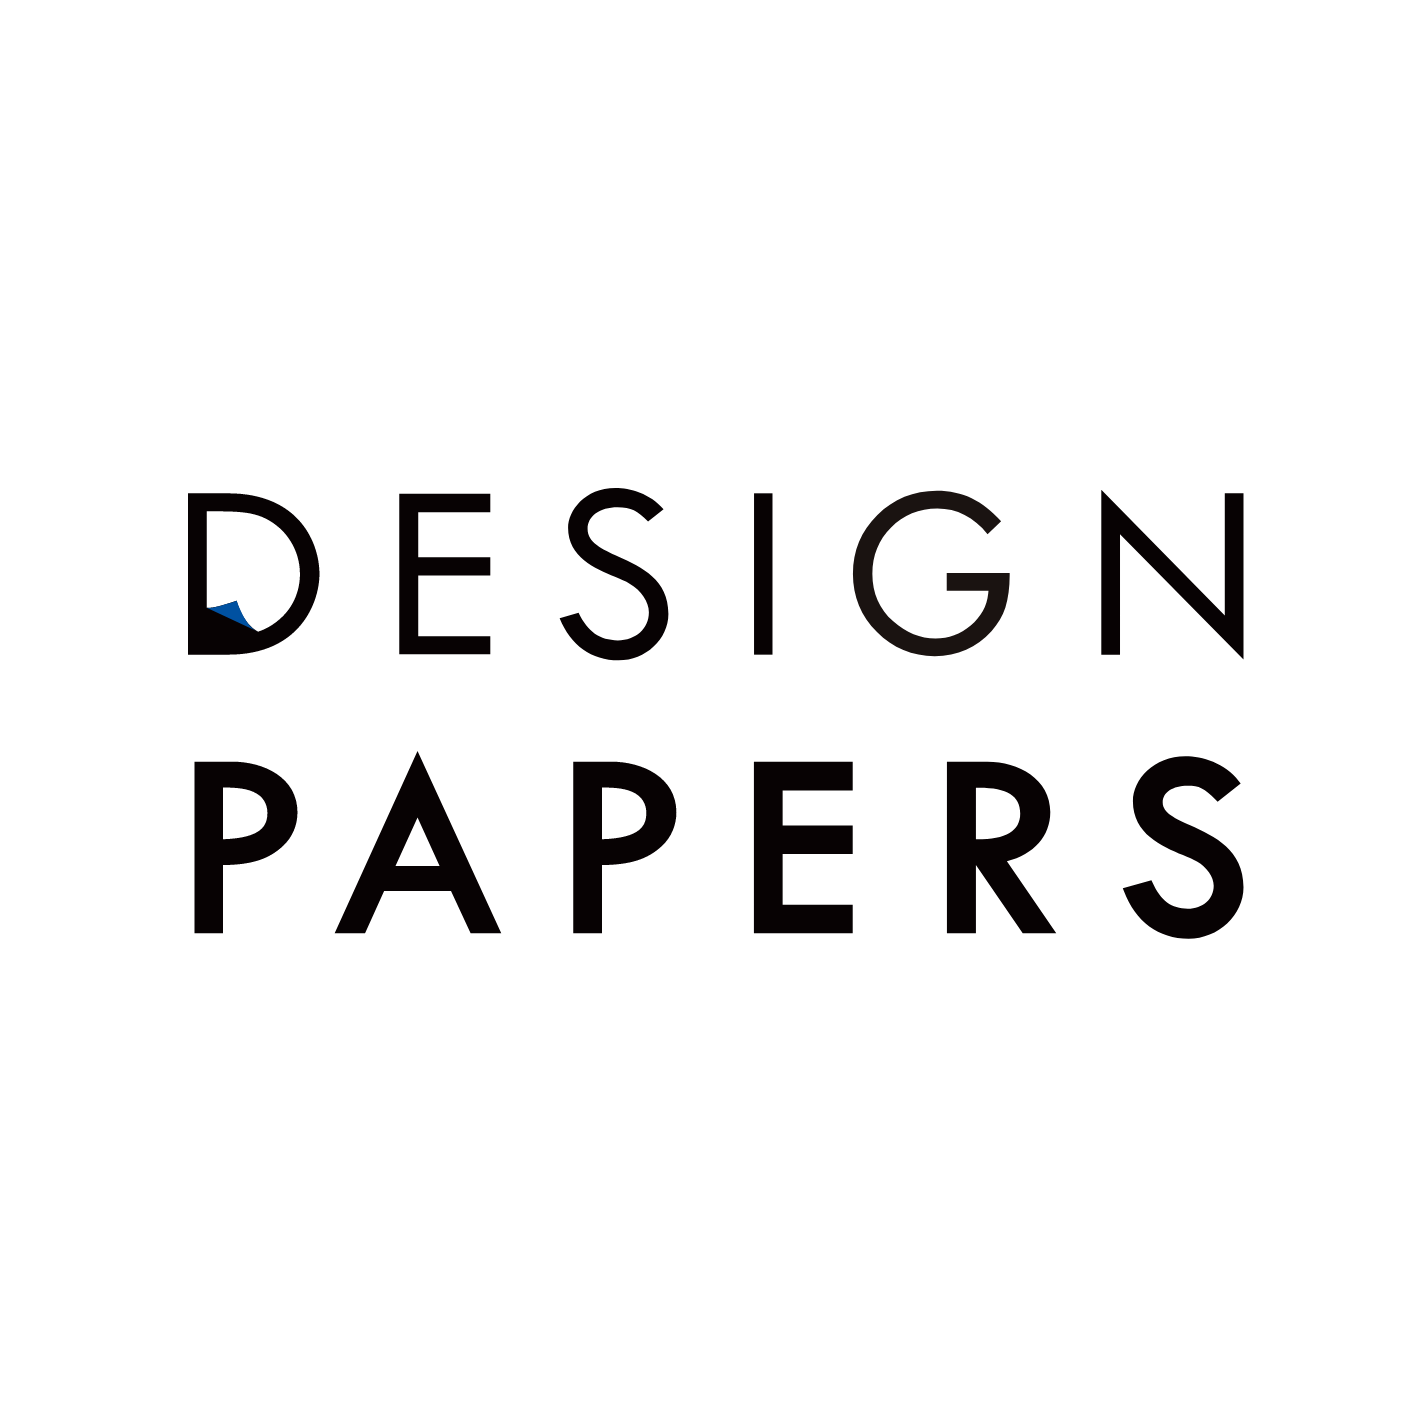 DESIGN PAPERS